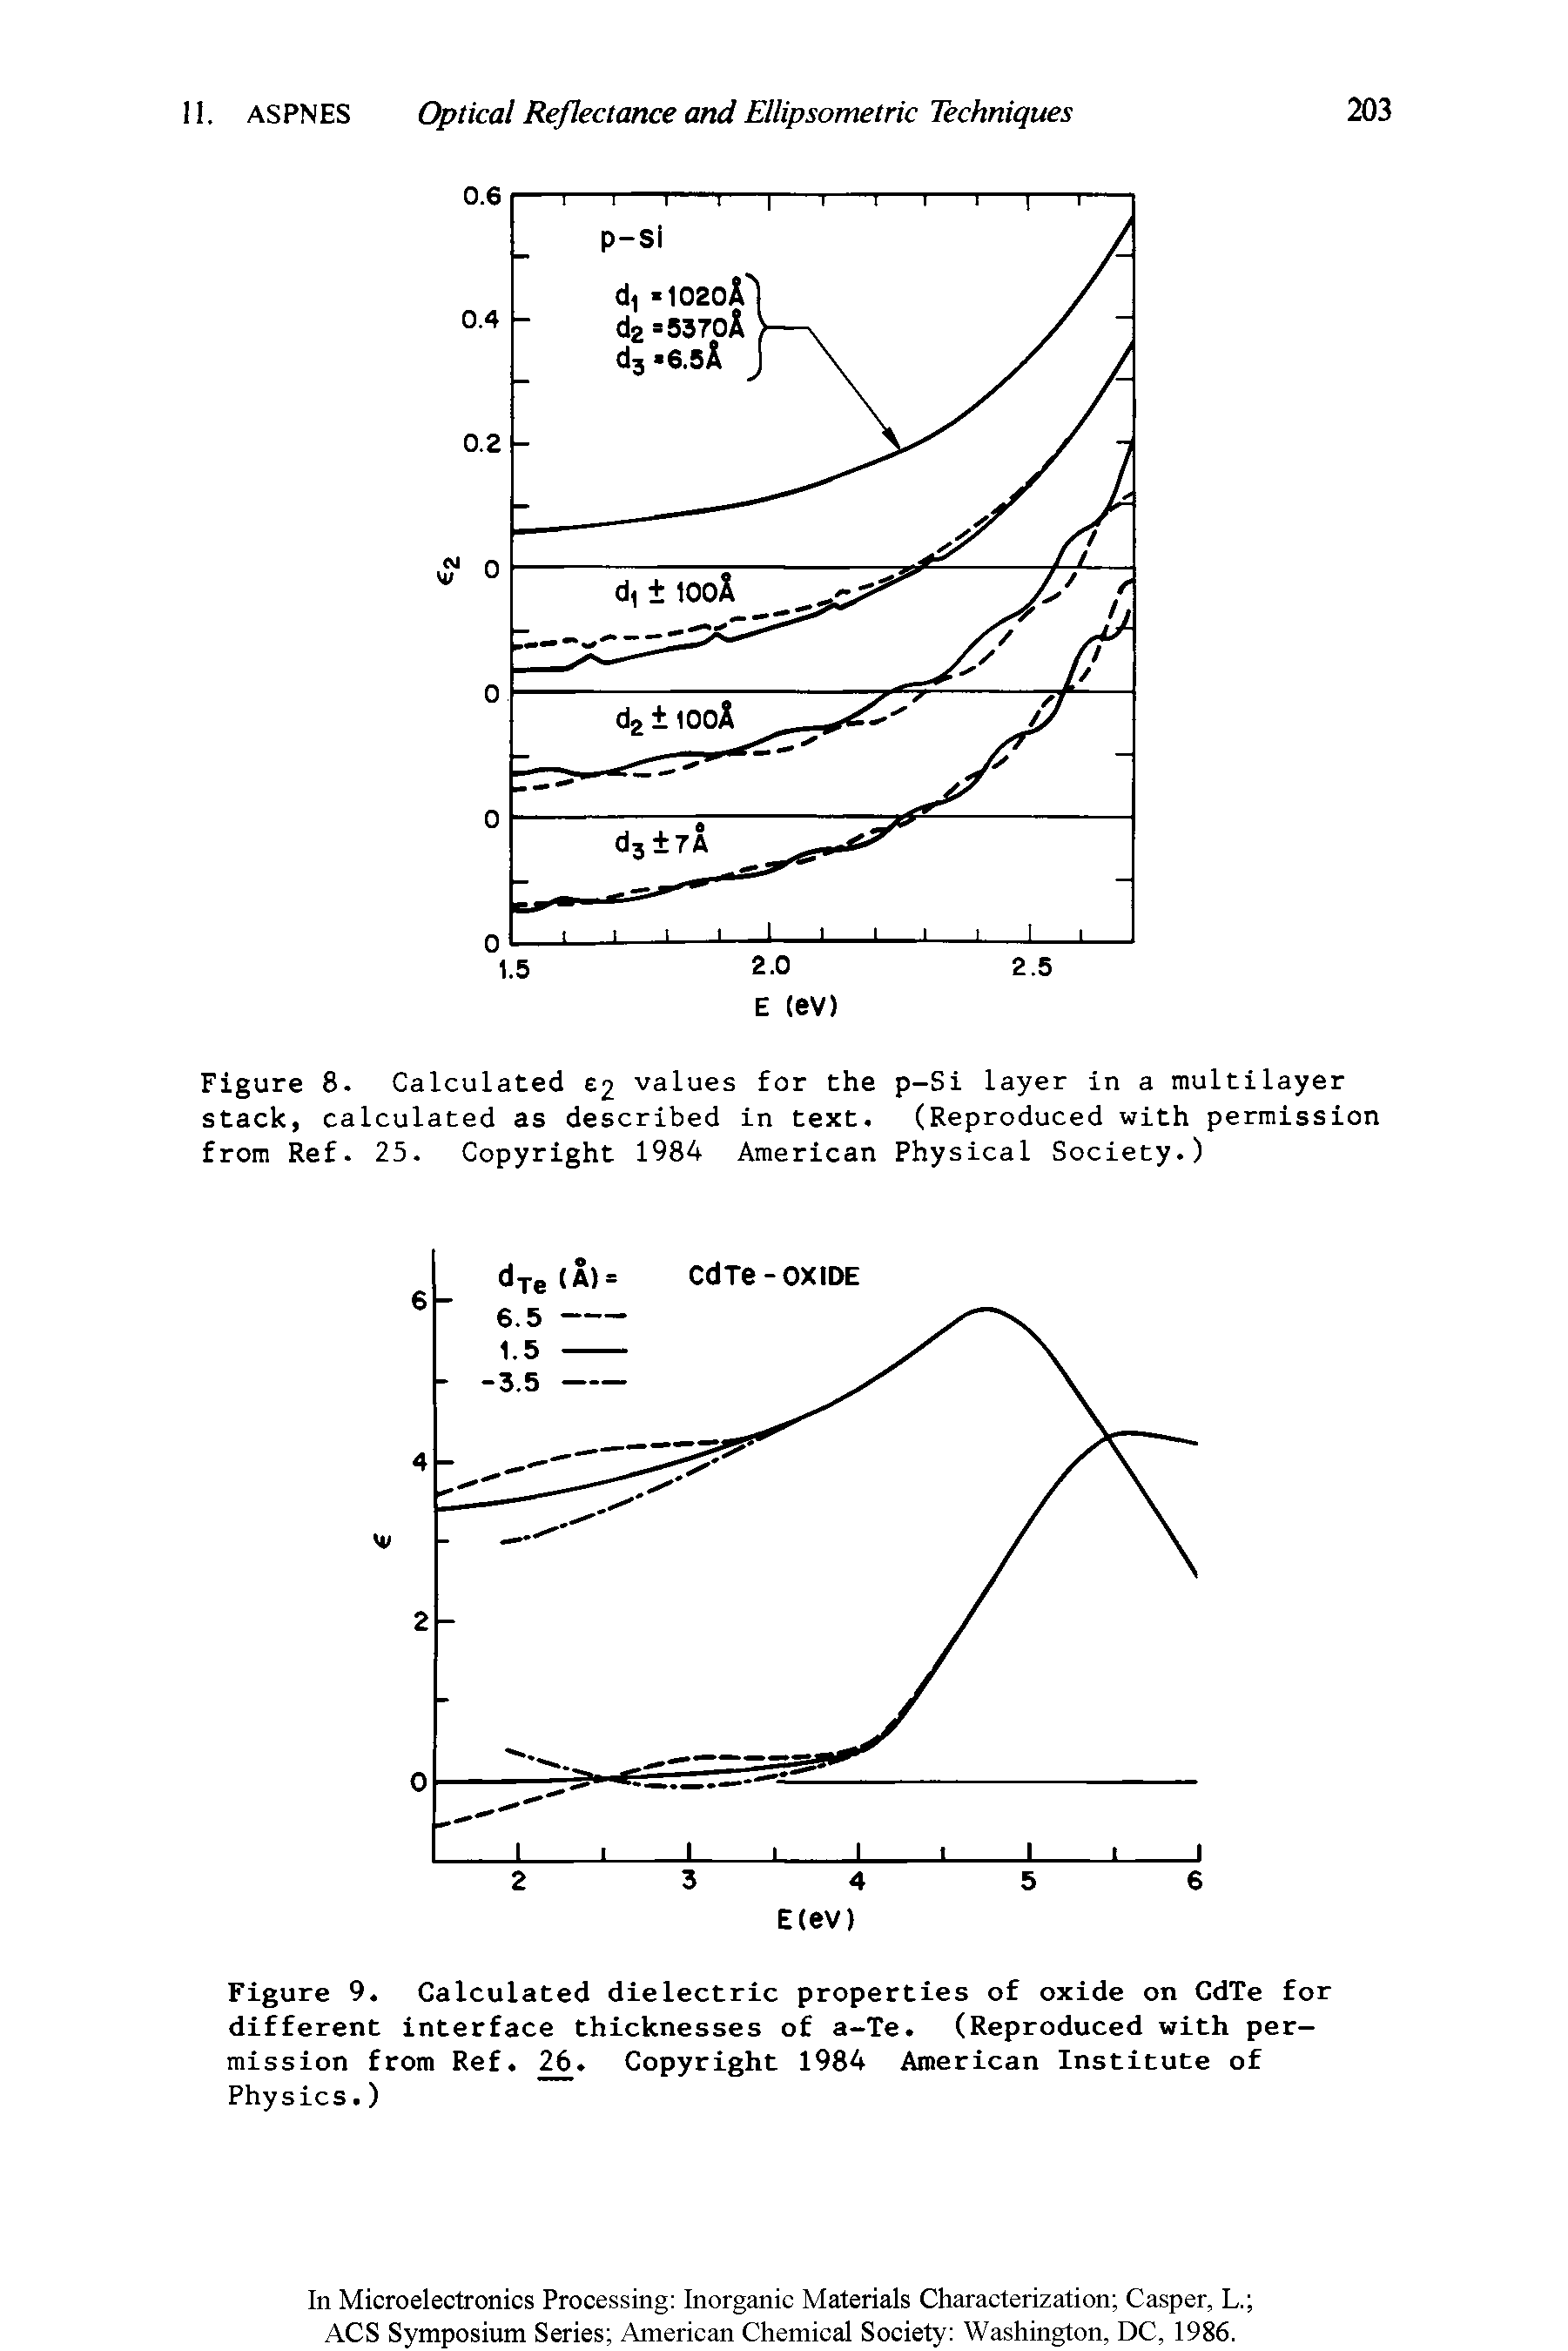 Figure 9. Calculated dielectric properties of oxide on CdTe for different interface thicknesses of a-Te. (Reproduced with permission from Ref. 26. Copyright 1984 American Institute of Physics.)...